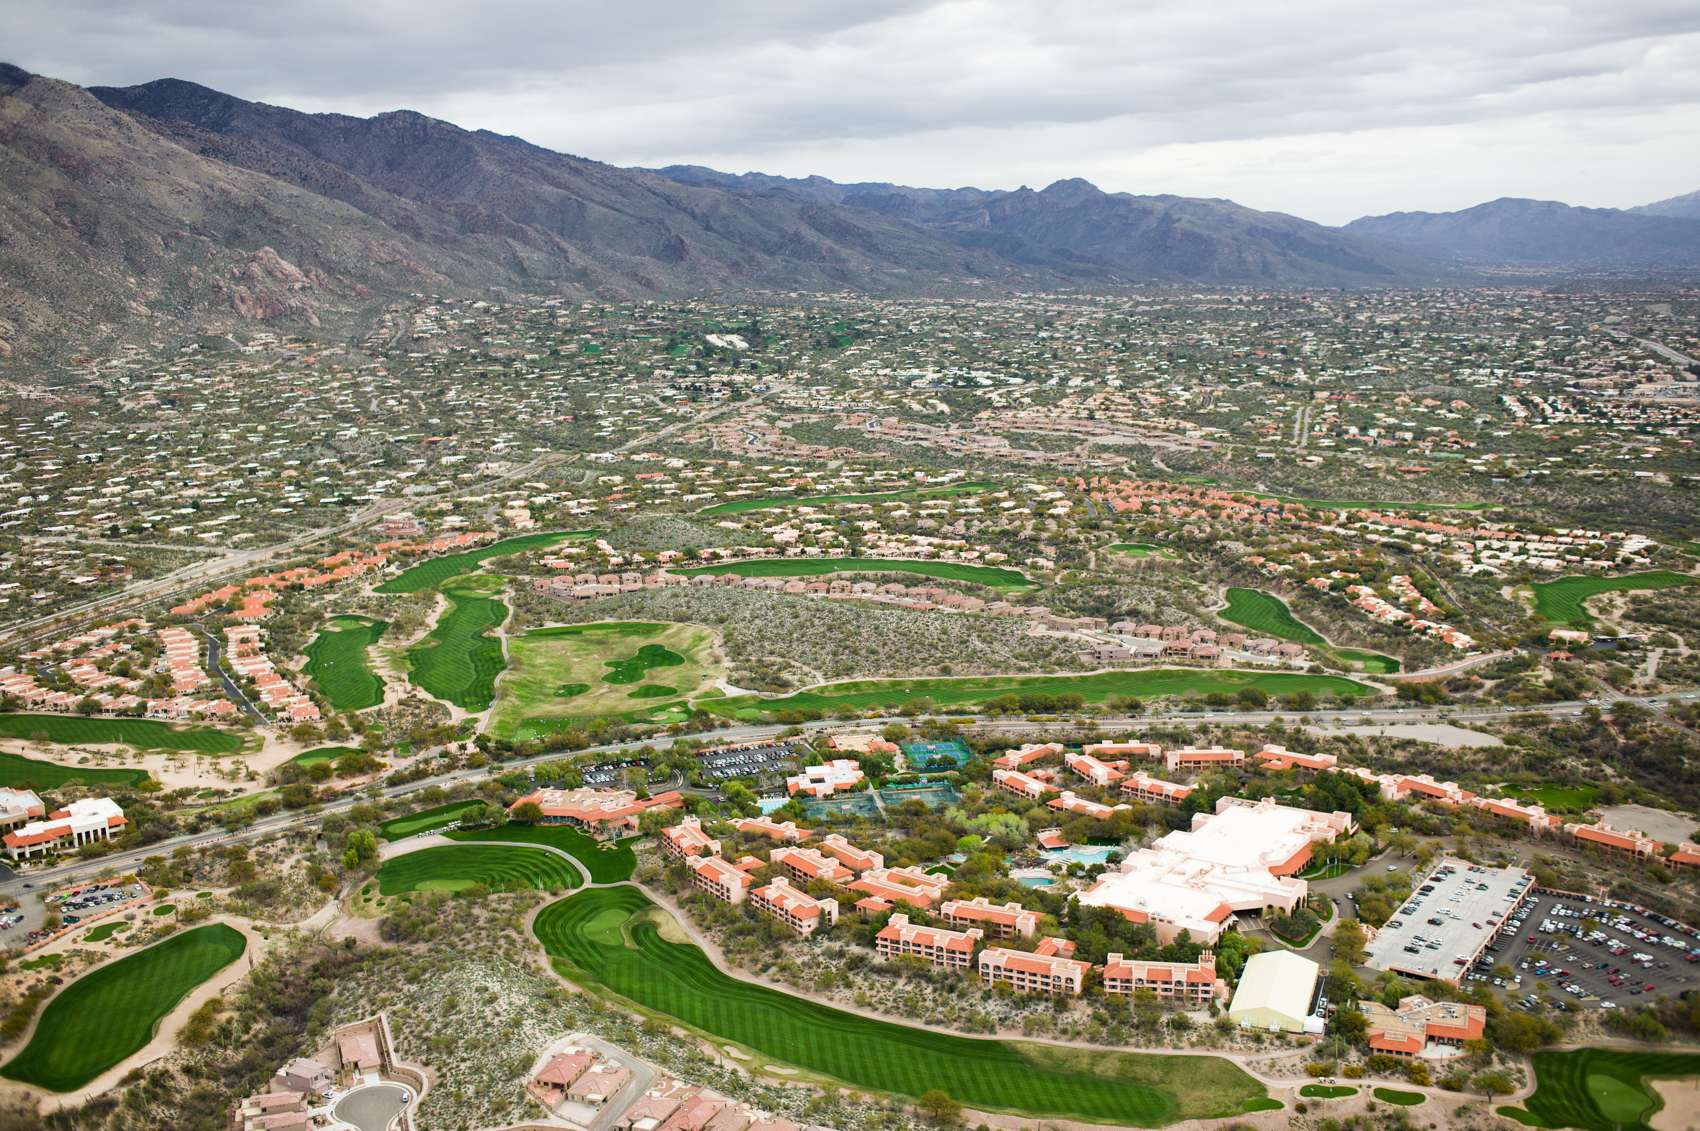 An affluent community in southern Arizona, Catalina Hills was built on desert up to the mountains.